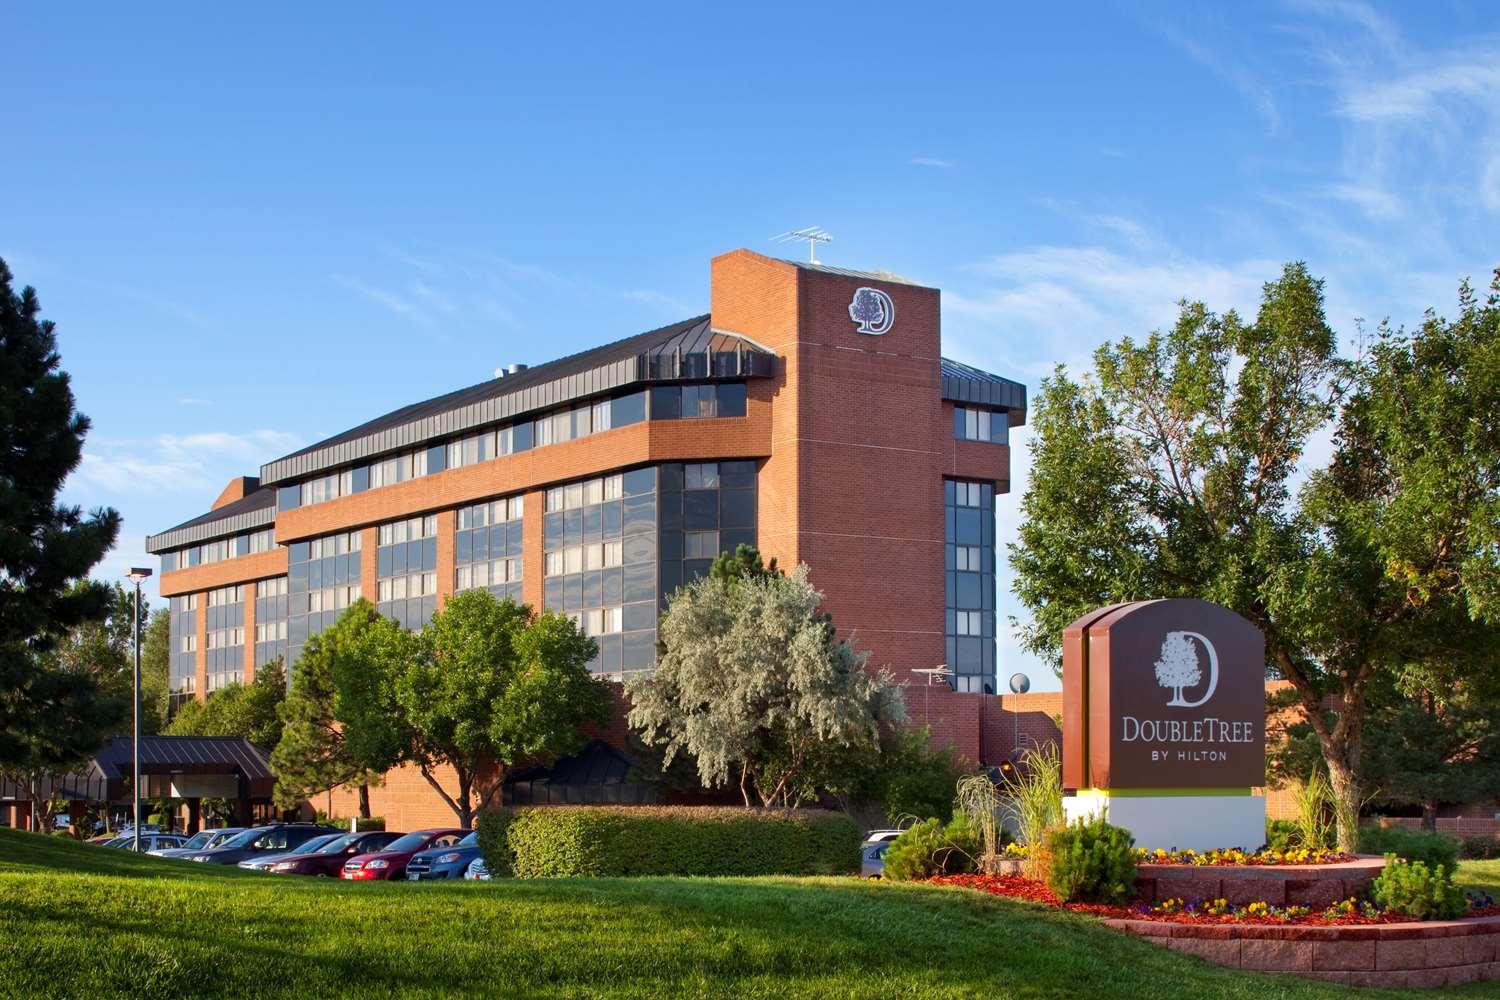 DoubleTree by Hilton Hotel Denver - Westminster in Westminster, CO